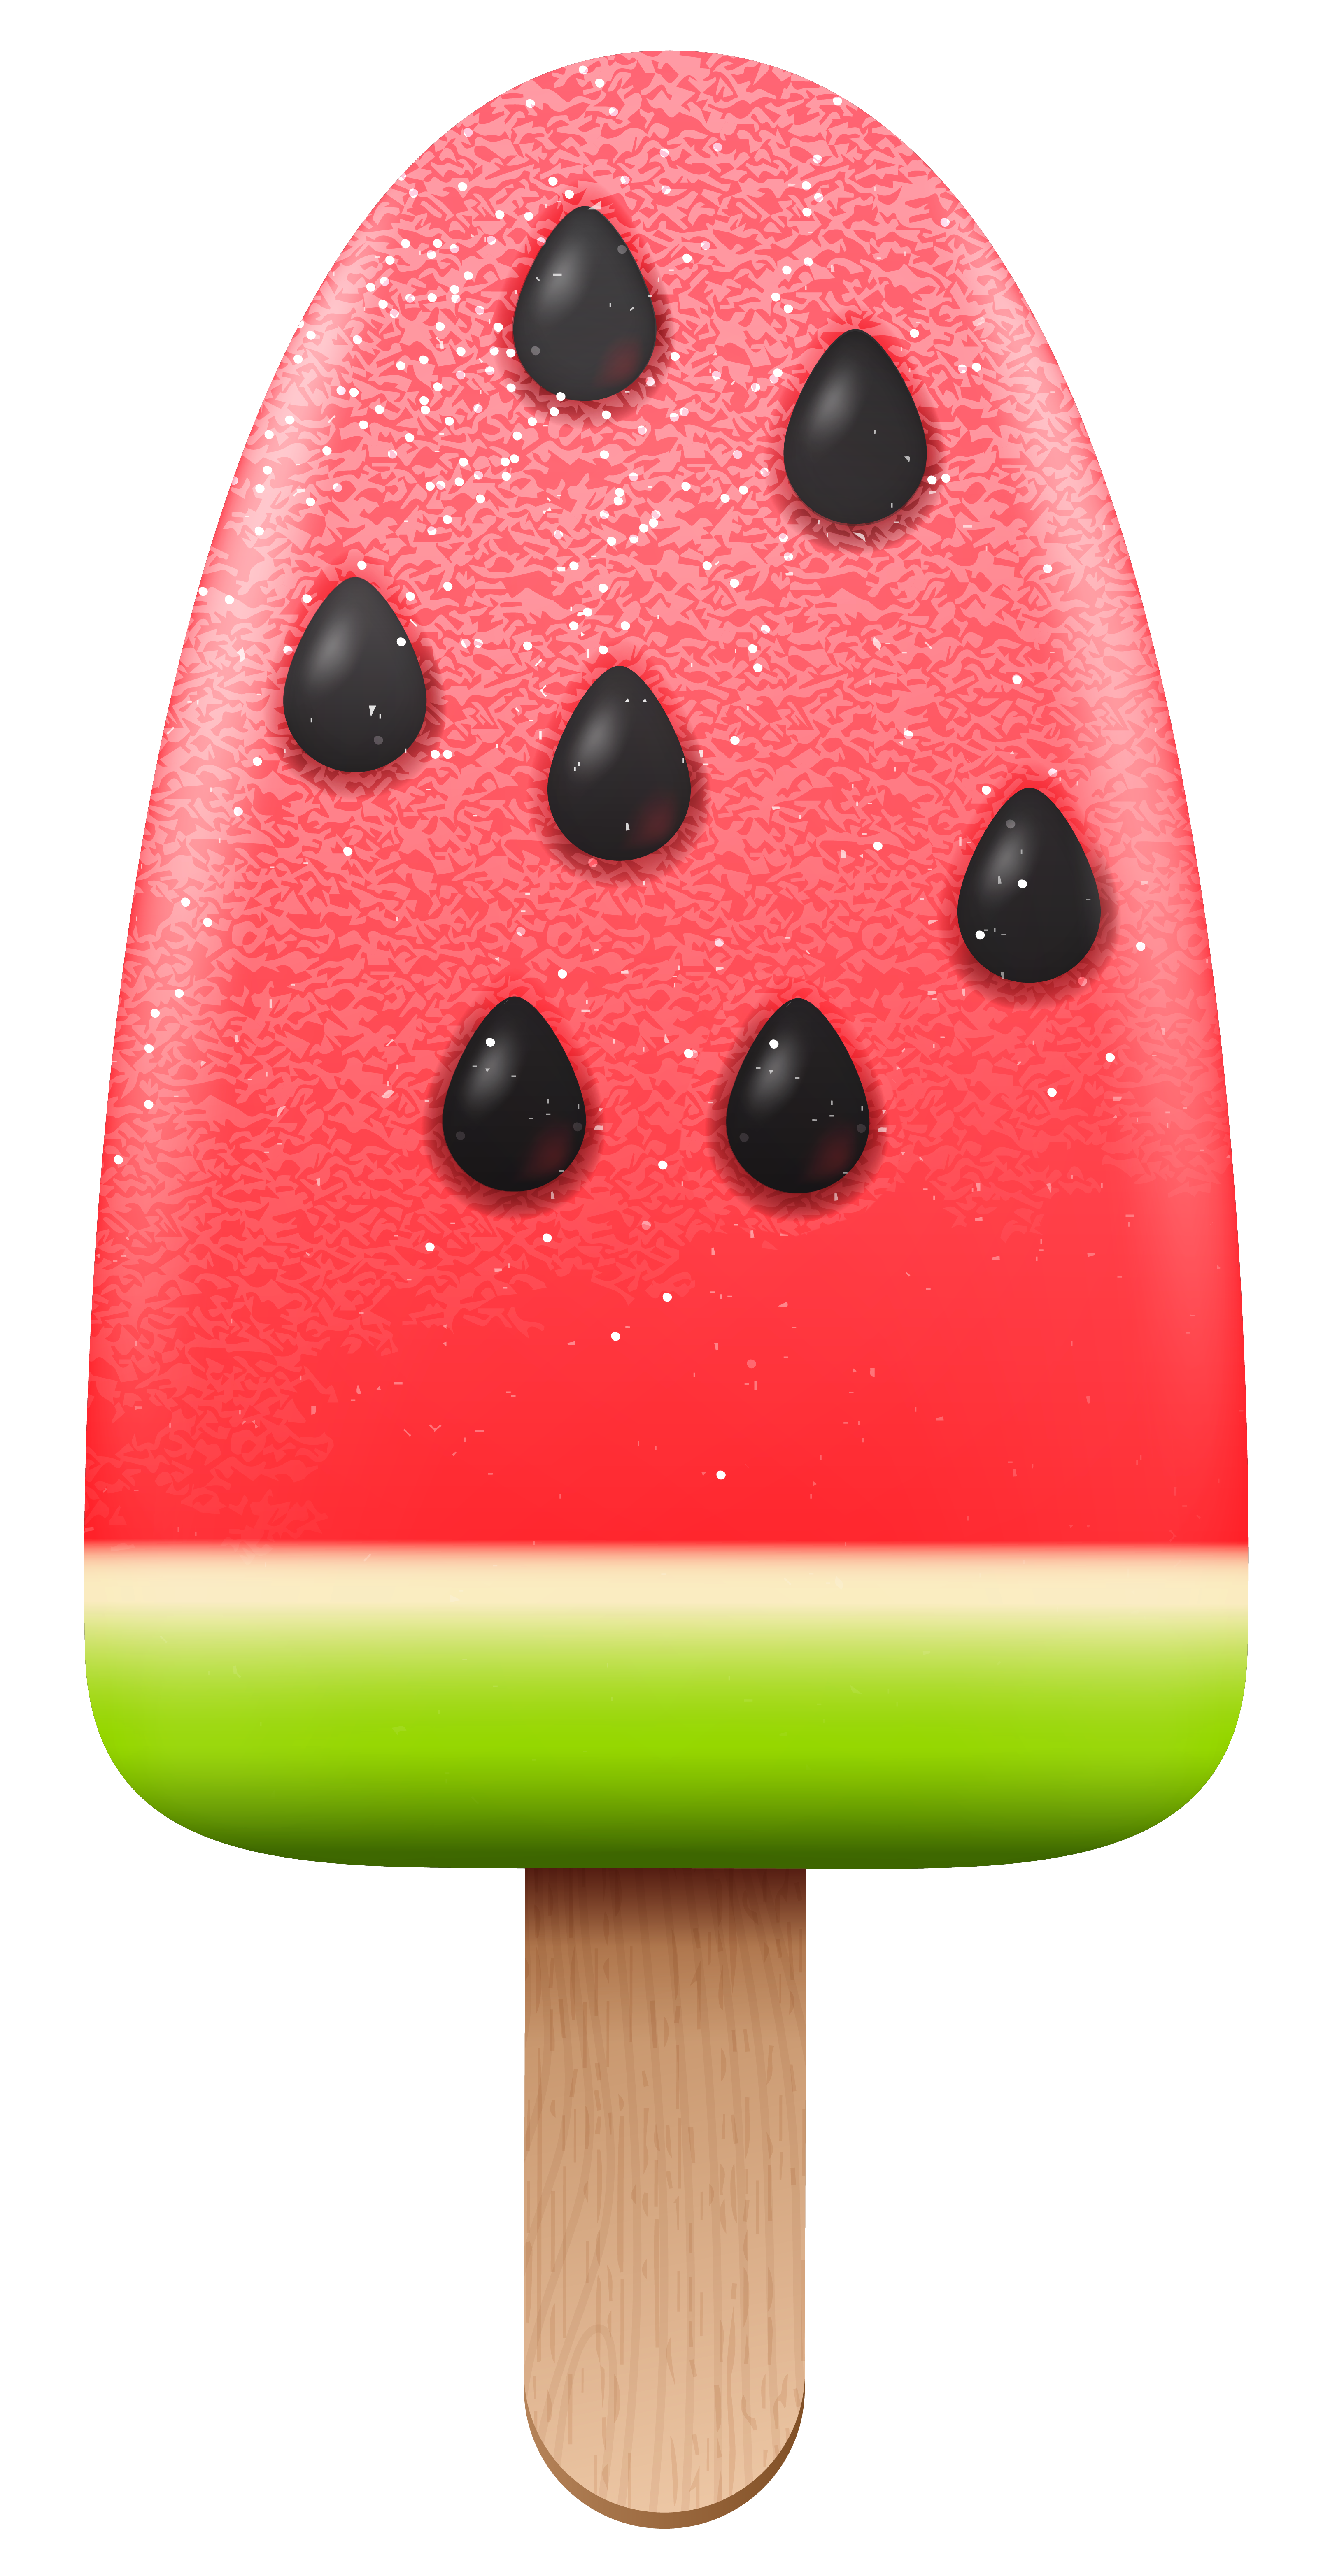 Watermelon clipart ice cream. Melon png image gallery